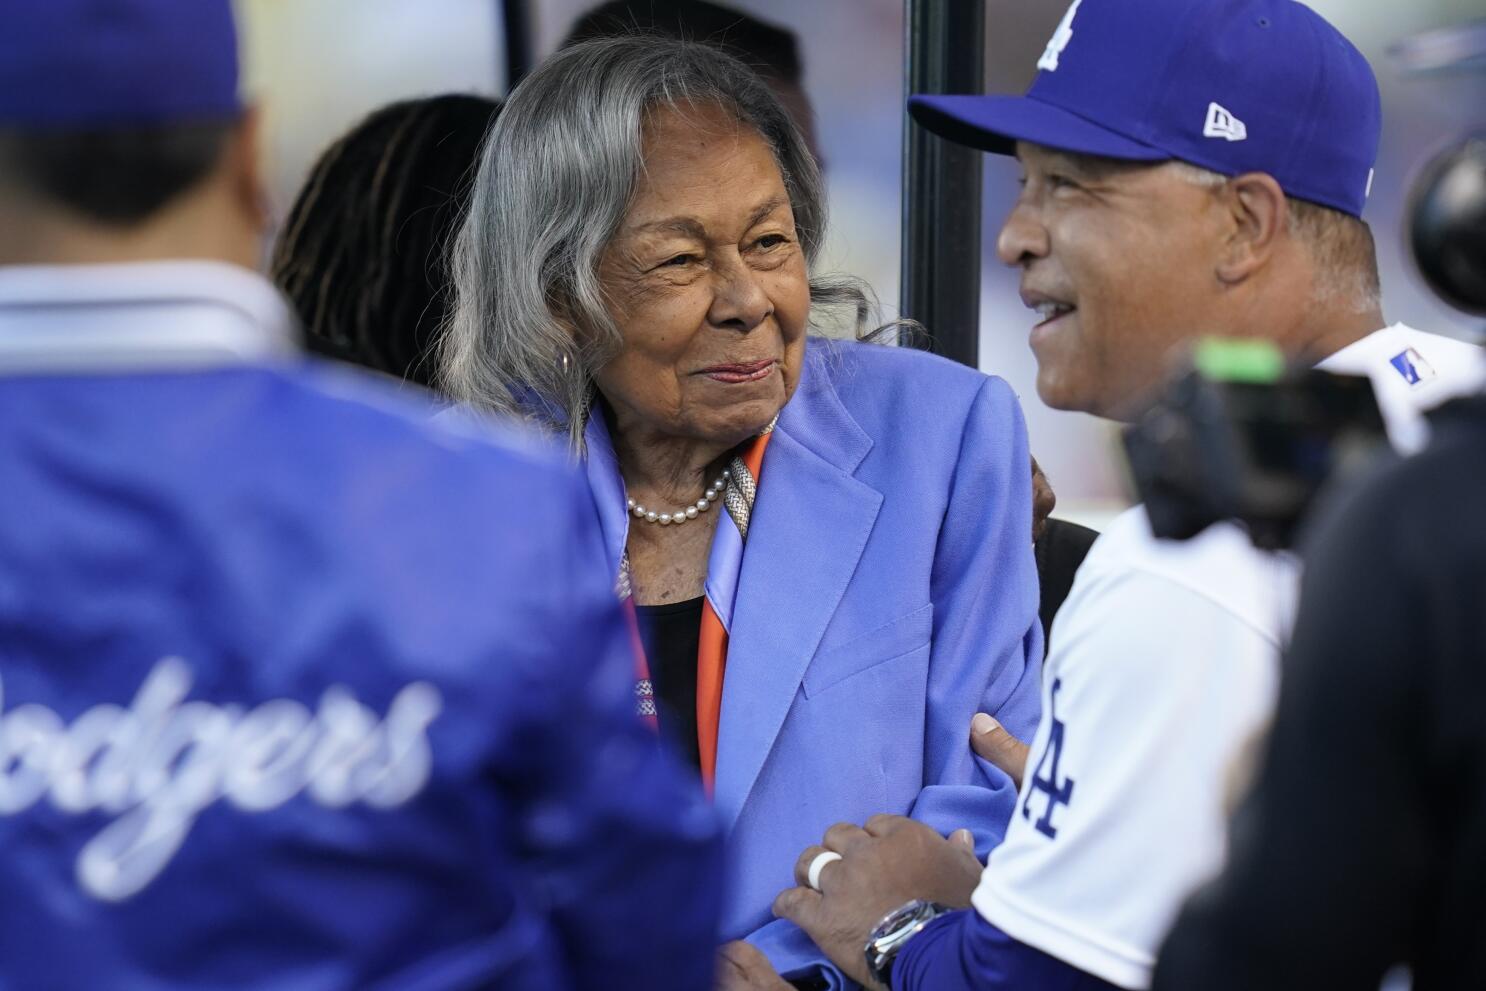 Jackie's wife, yes, but Rachel Robinson herself is a revelation